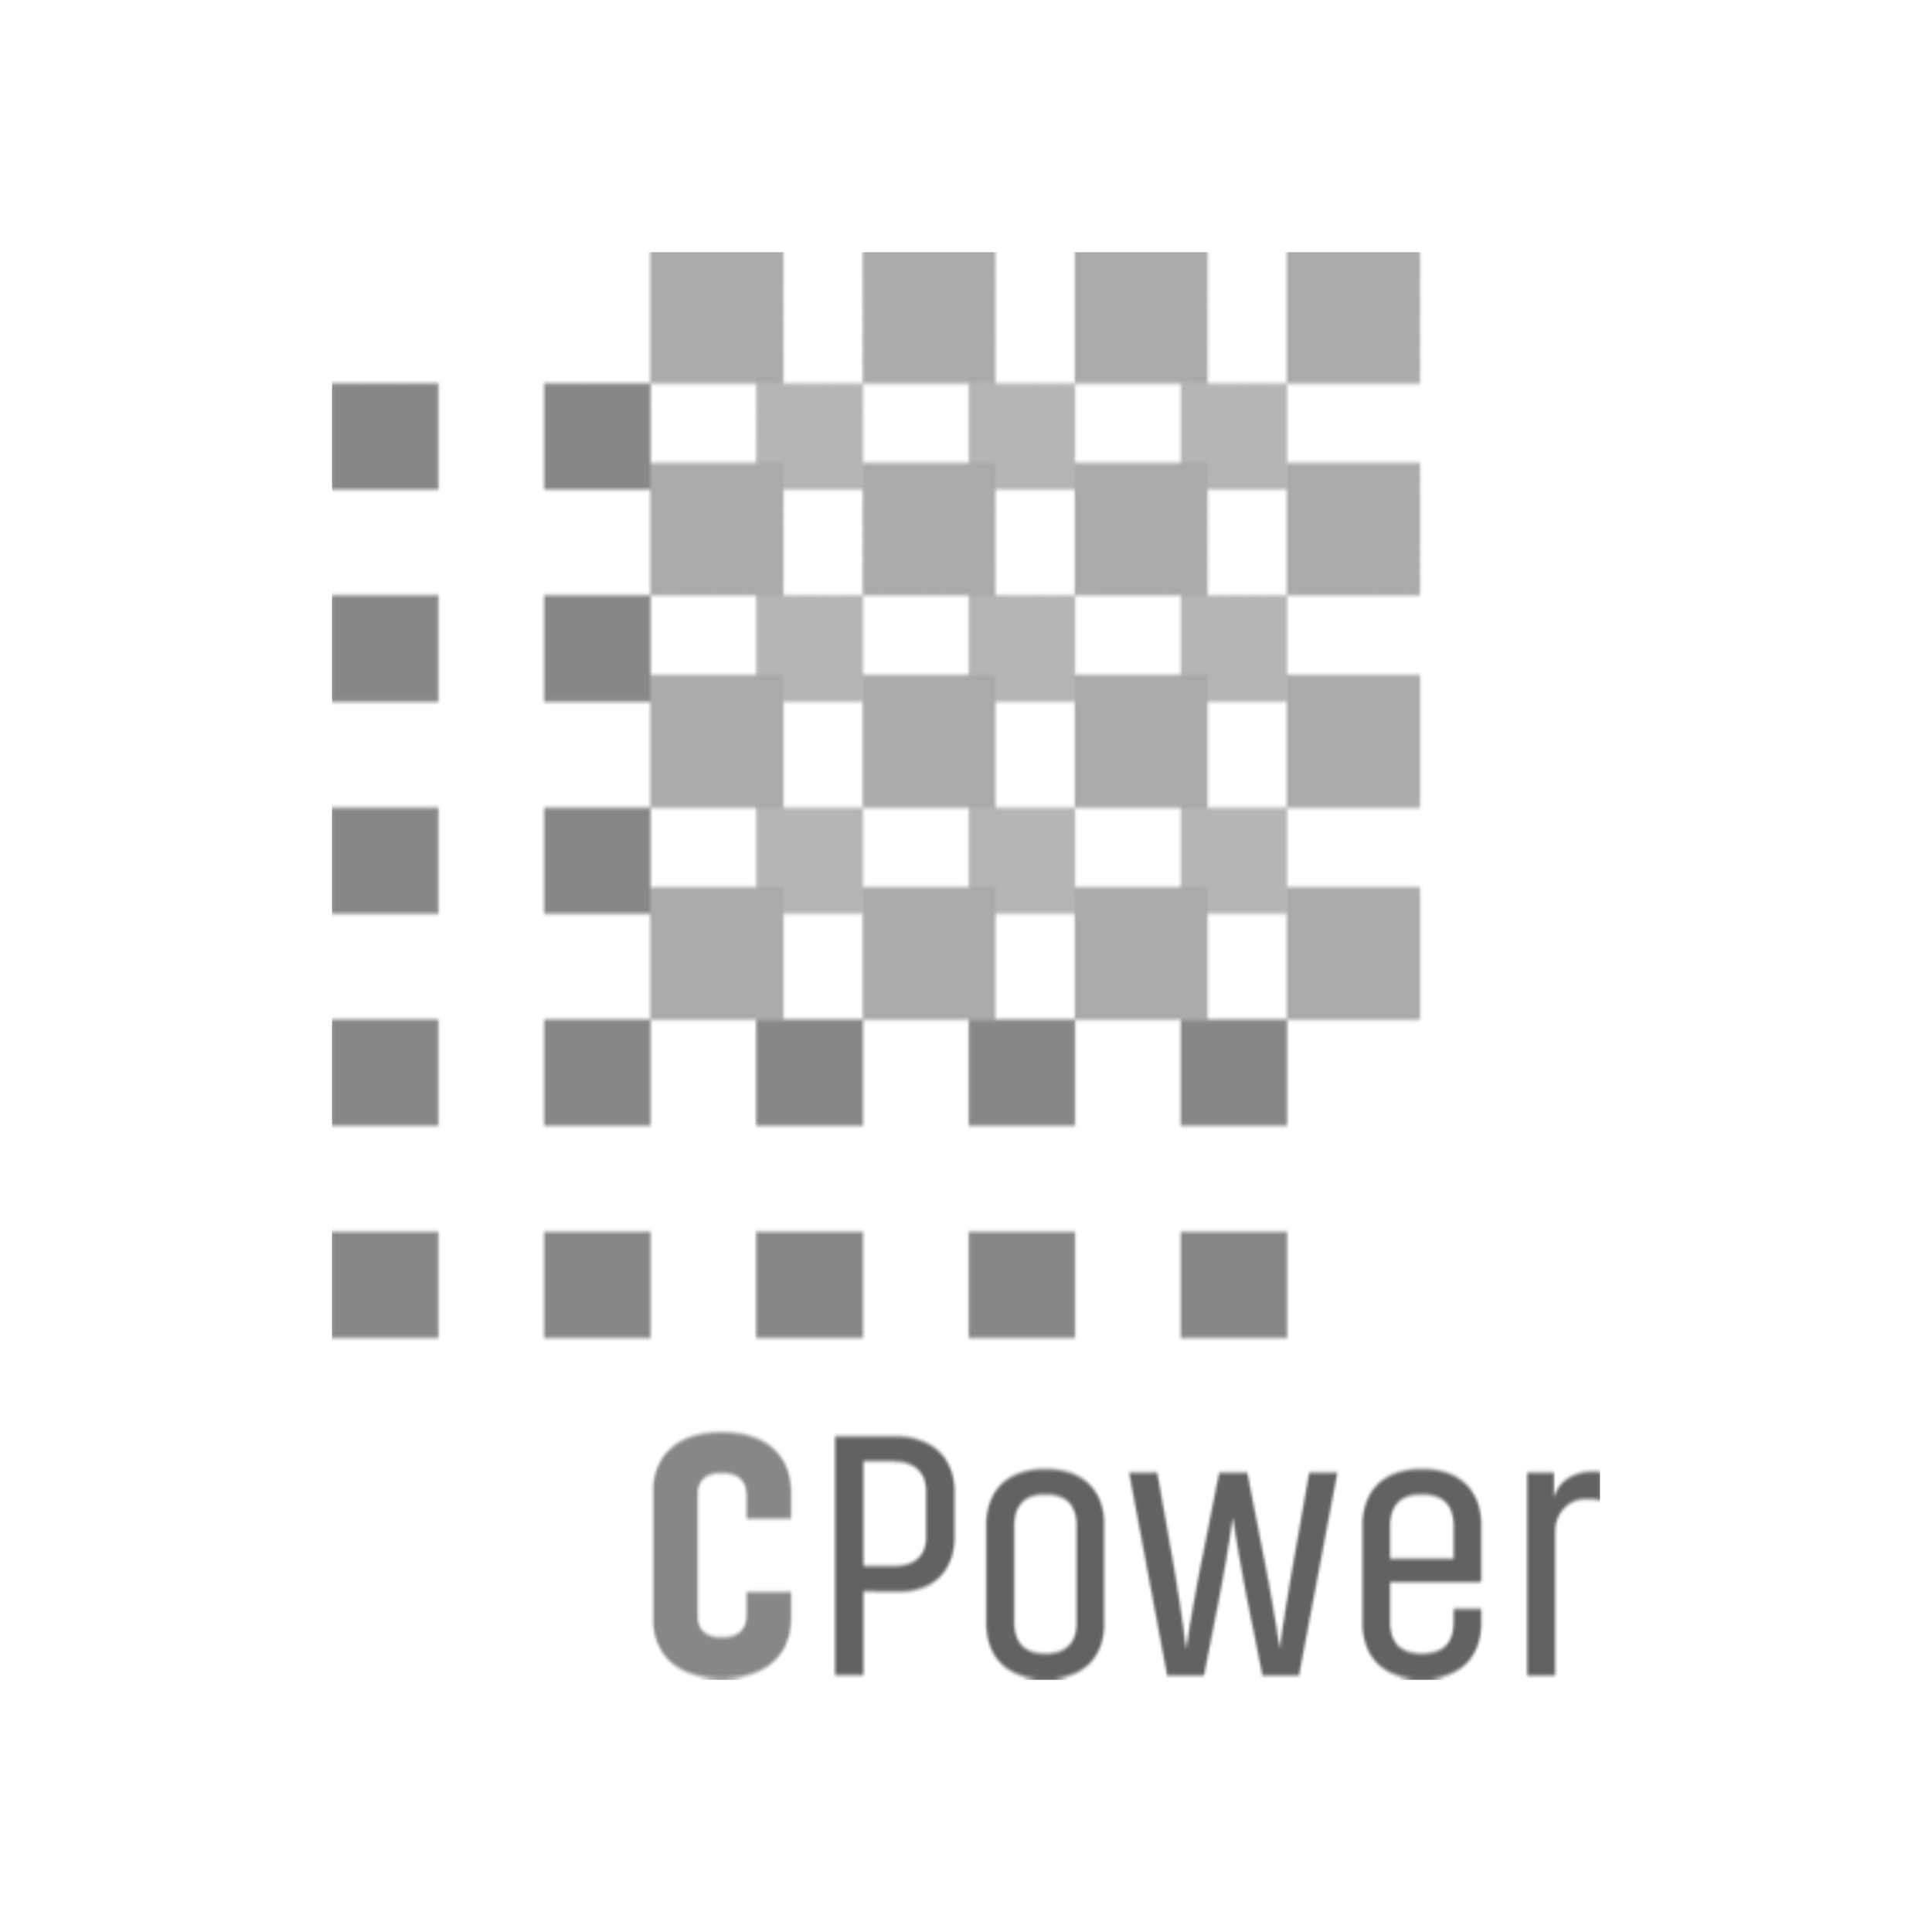 cpower_square.png